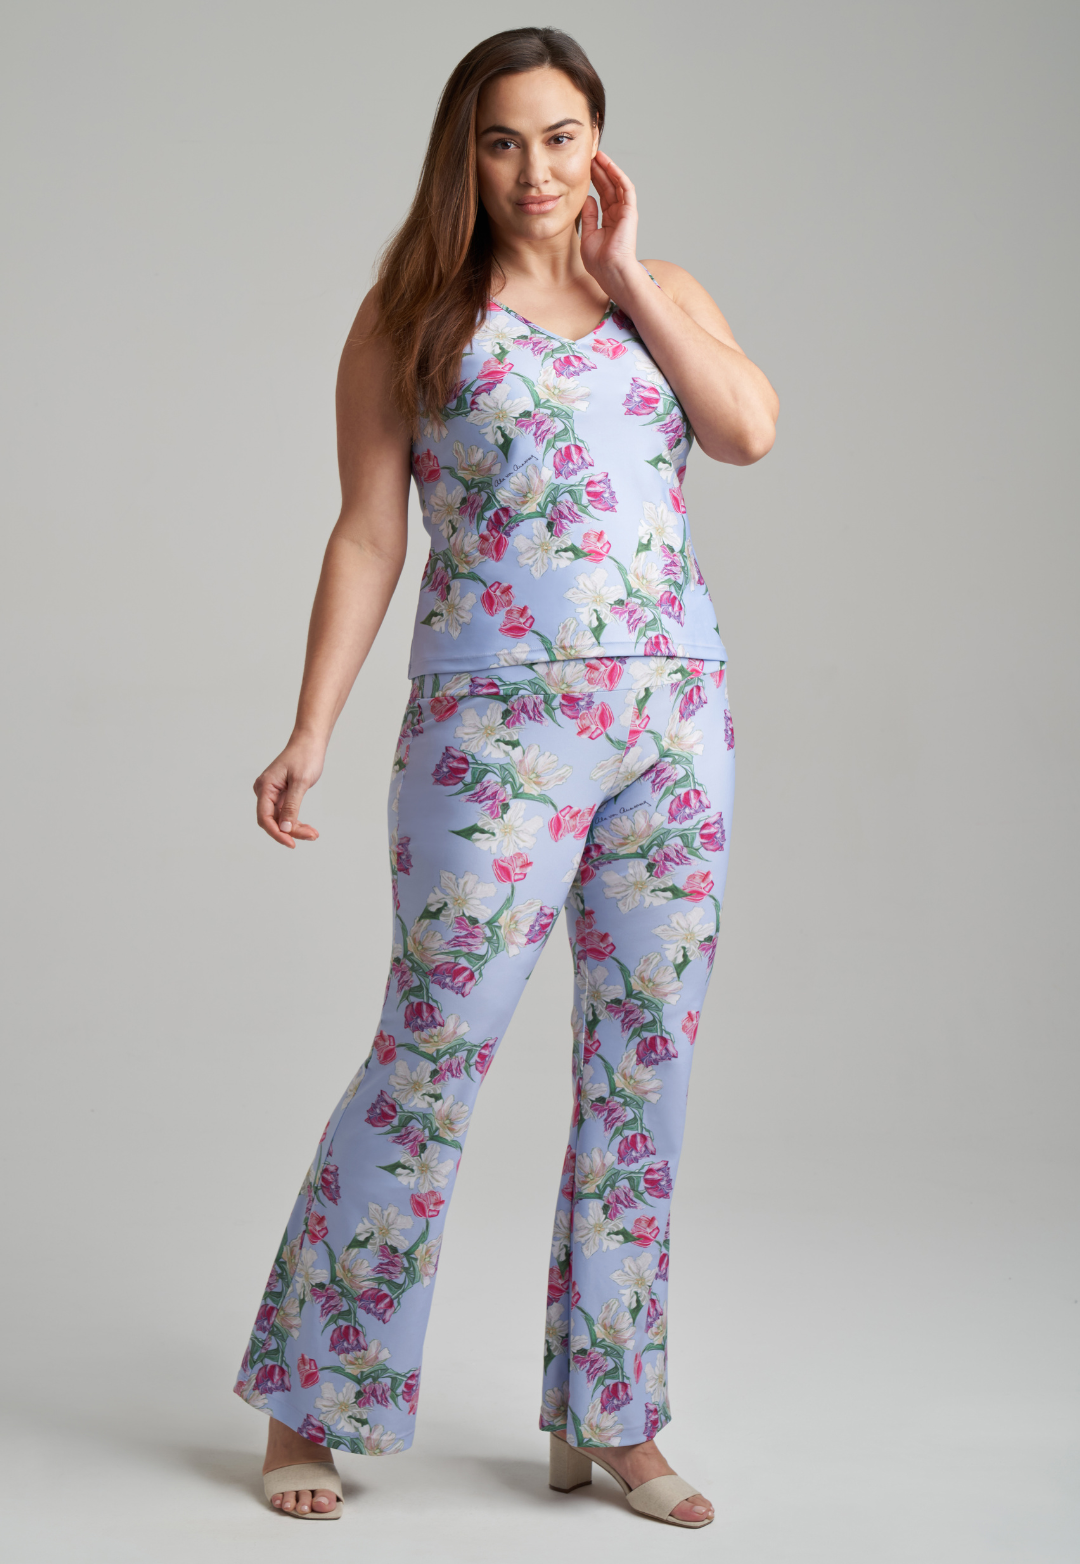 woman wearing stretch knit tank top and stretch knit pants in tulip print by Ala von Auersperg for spring summer 2021